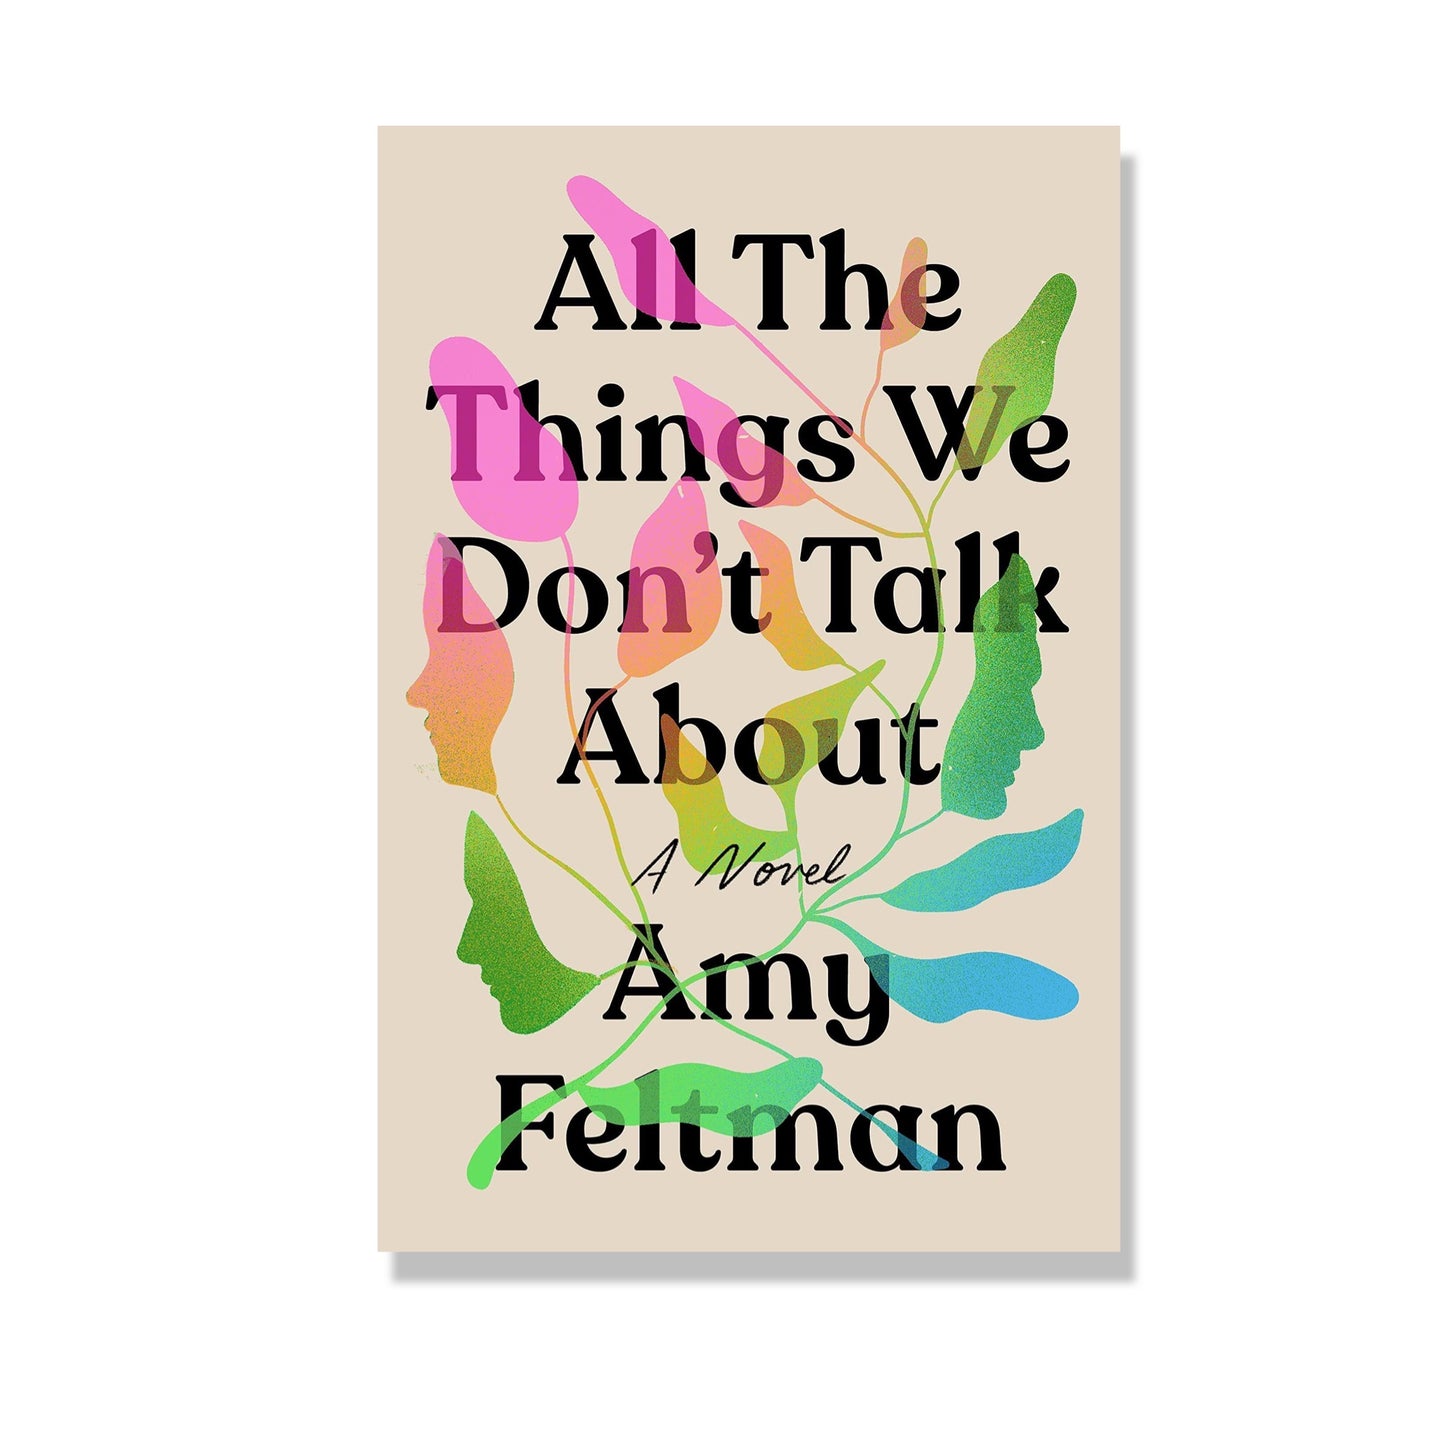 All the Things We Don’t Talk About: A Novel